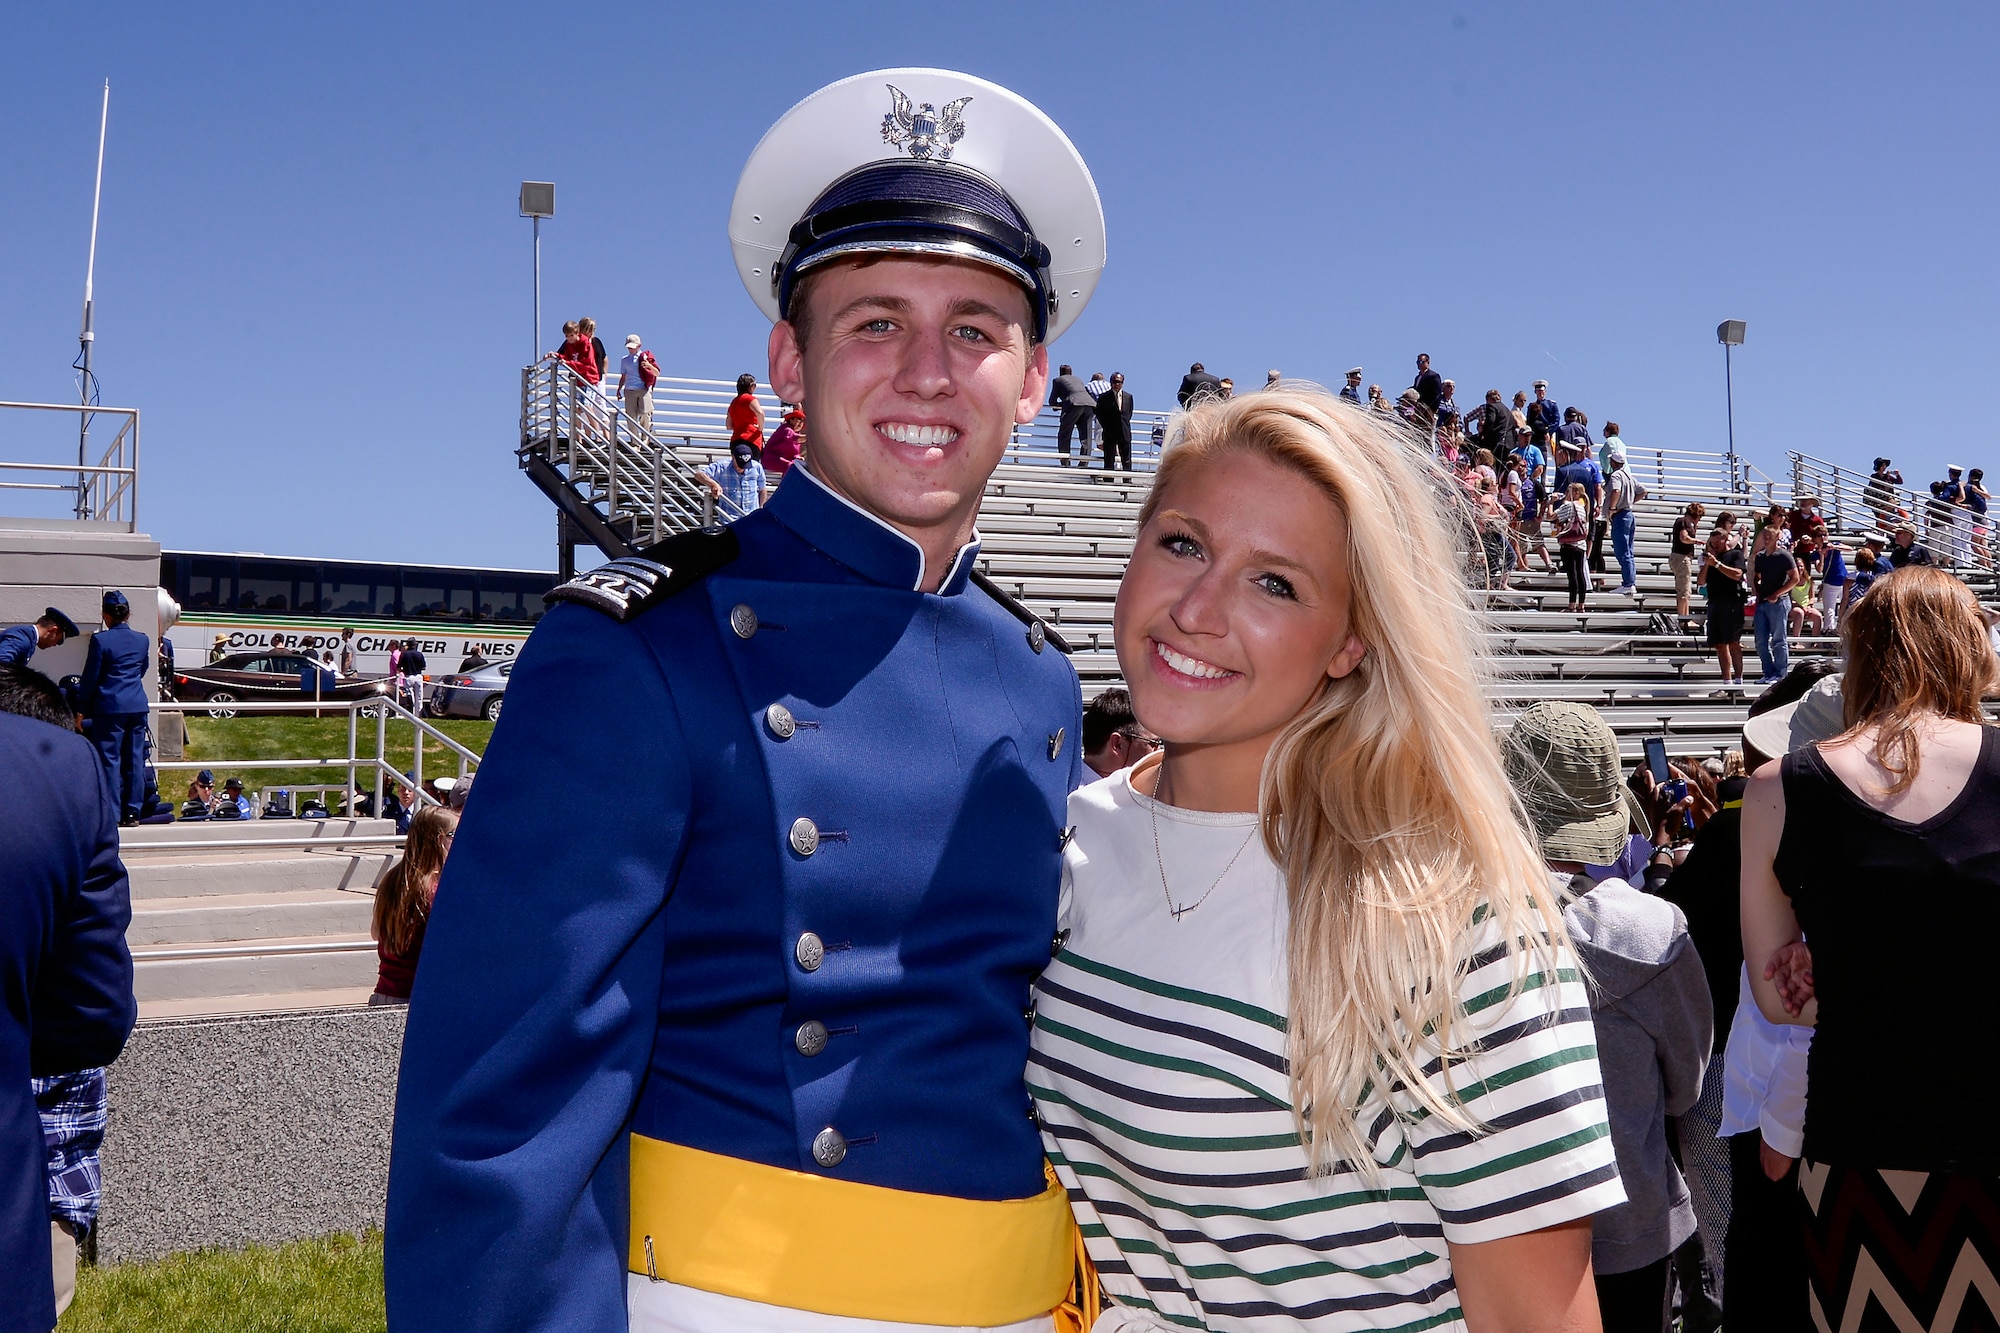 Second Lt. Blake Jones poses with his sister, Navy Ensign Madison Jones, after graduating May 28, 2014 from the U.S. Air Force Academy, Colo. The Jones siblings chose the same path of military service by becoming Air Force, Navy and Army officers. (U.S. Air Force Photo/Liz Copan)